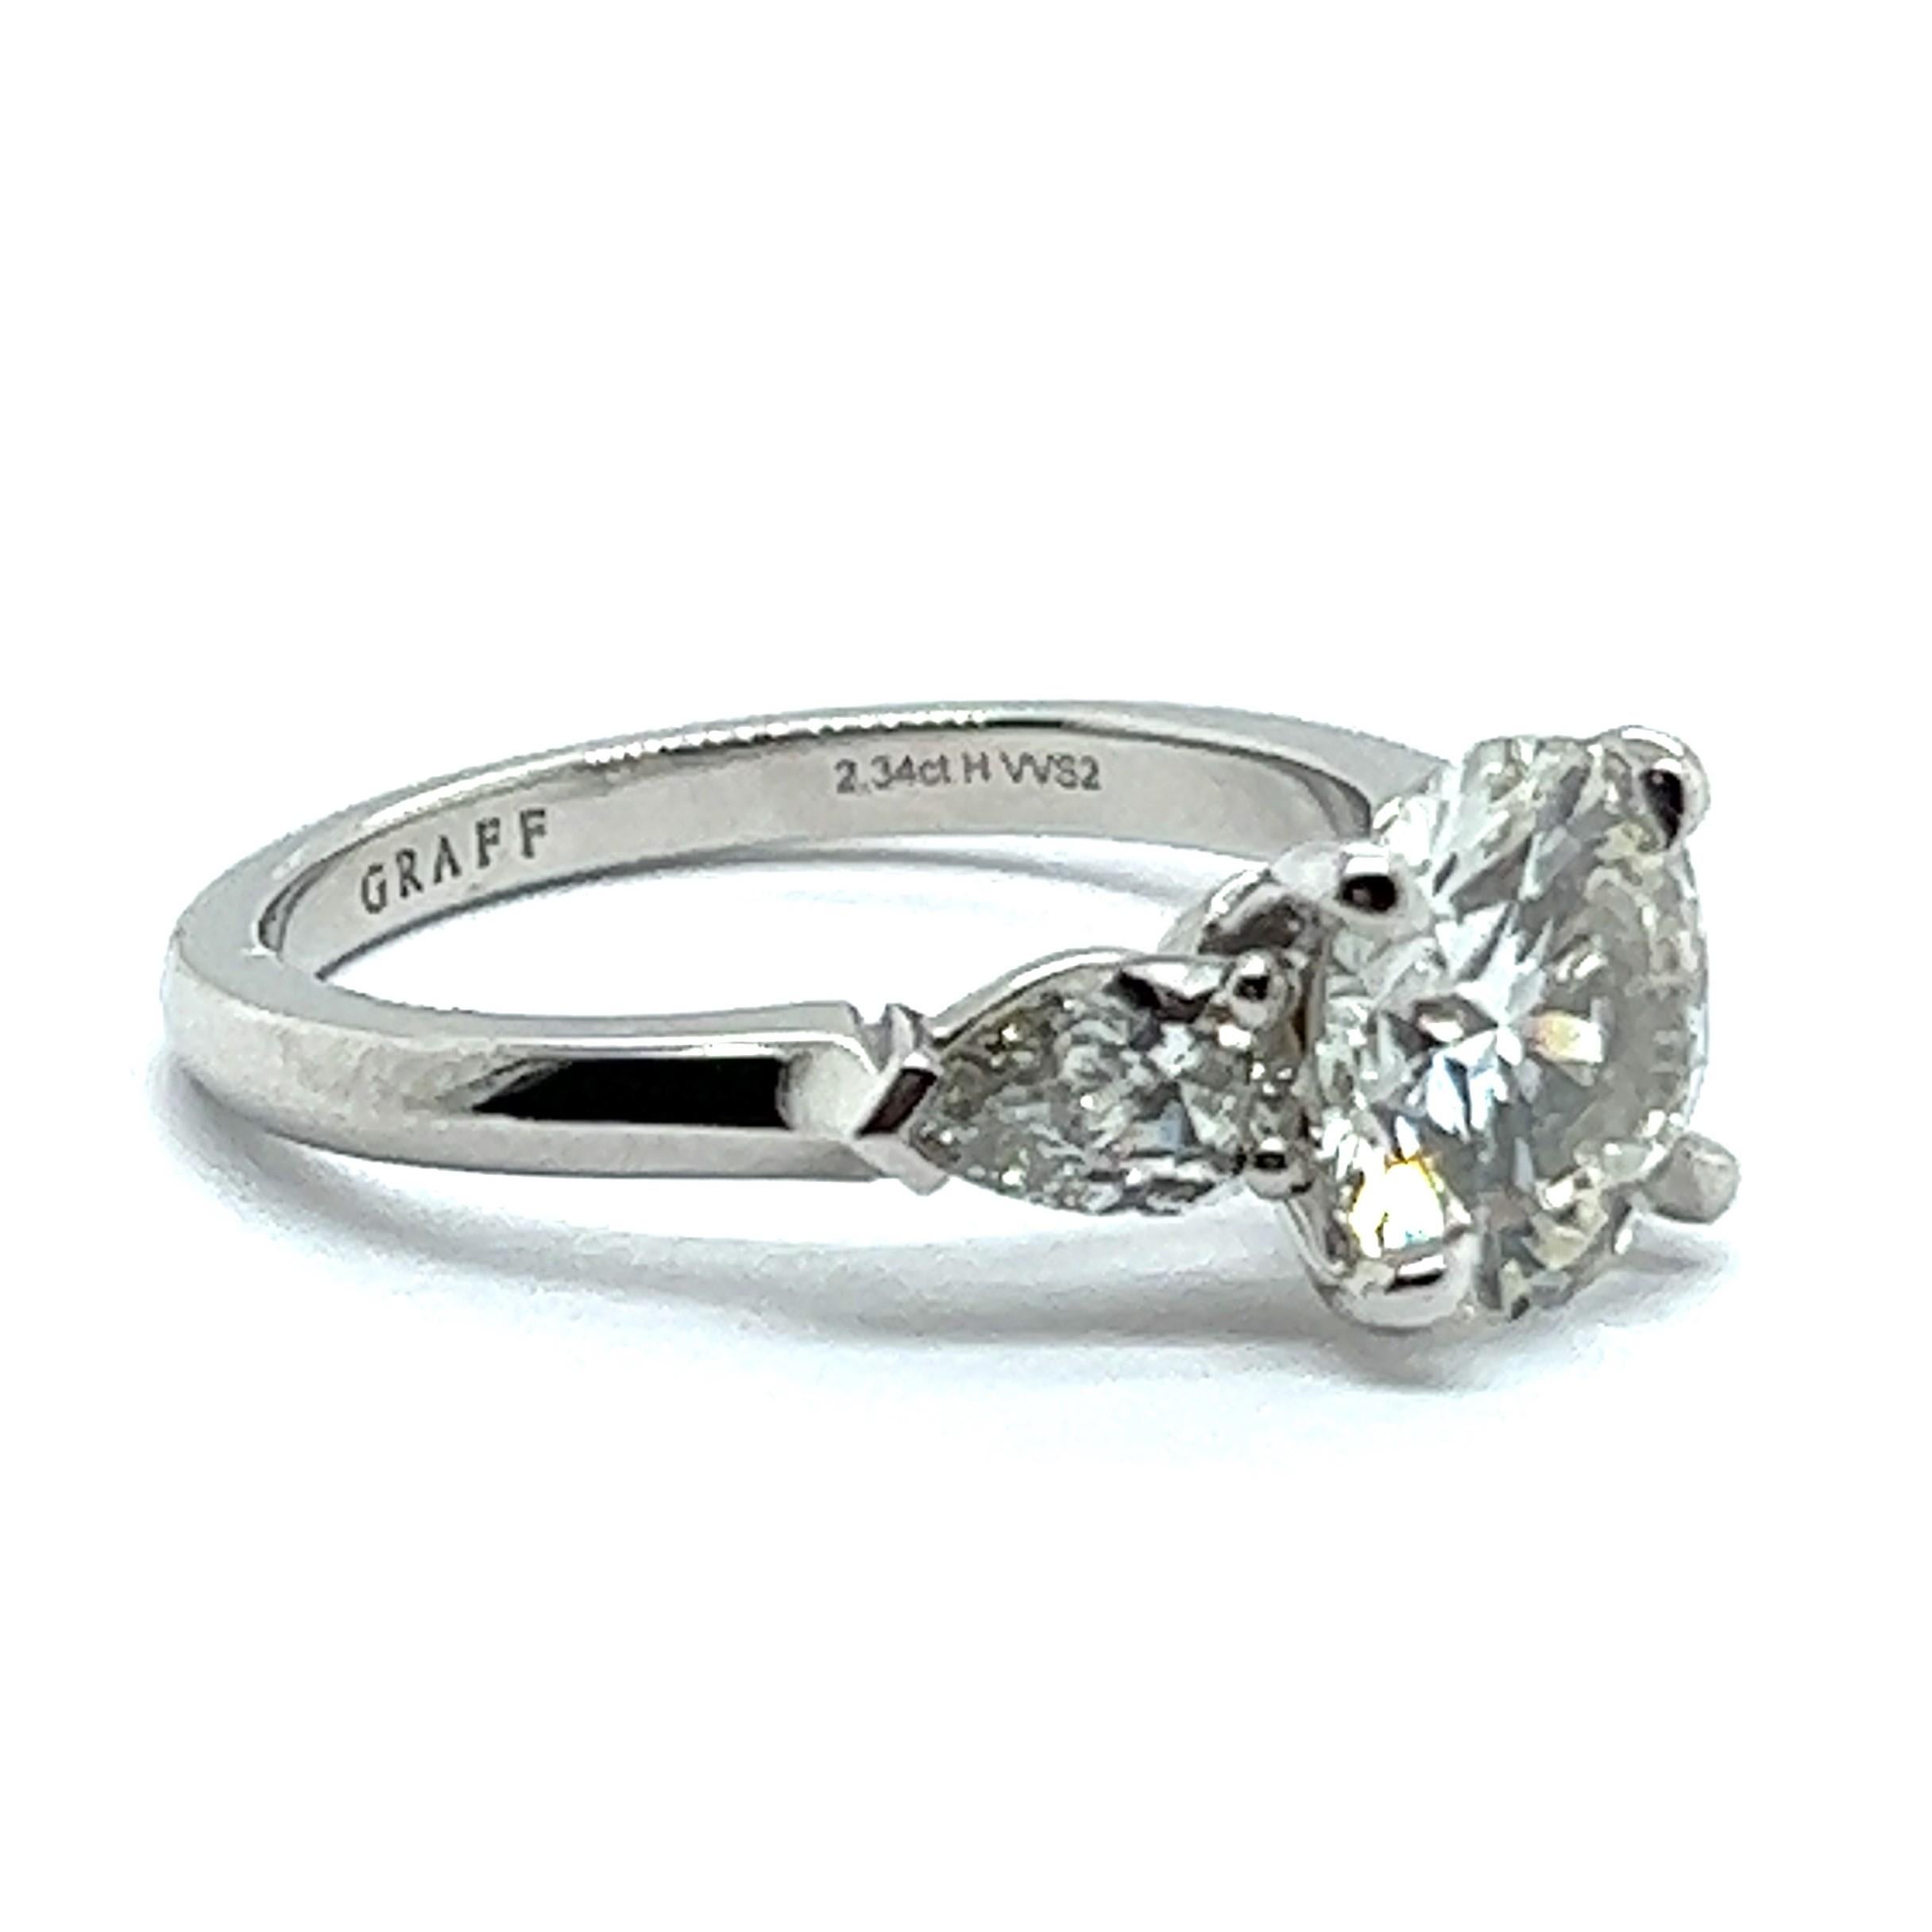 Brilliant Cut Exceptional 2.34 Carat GIA Certified Diamond Ring in Platinum by Graff For Sale